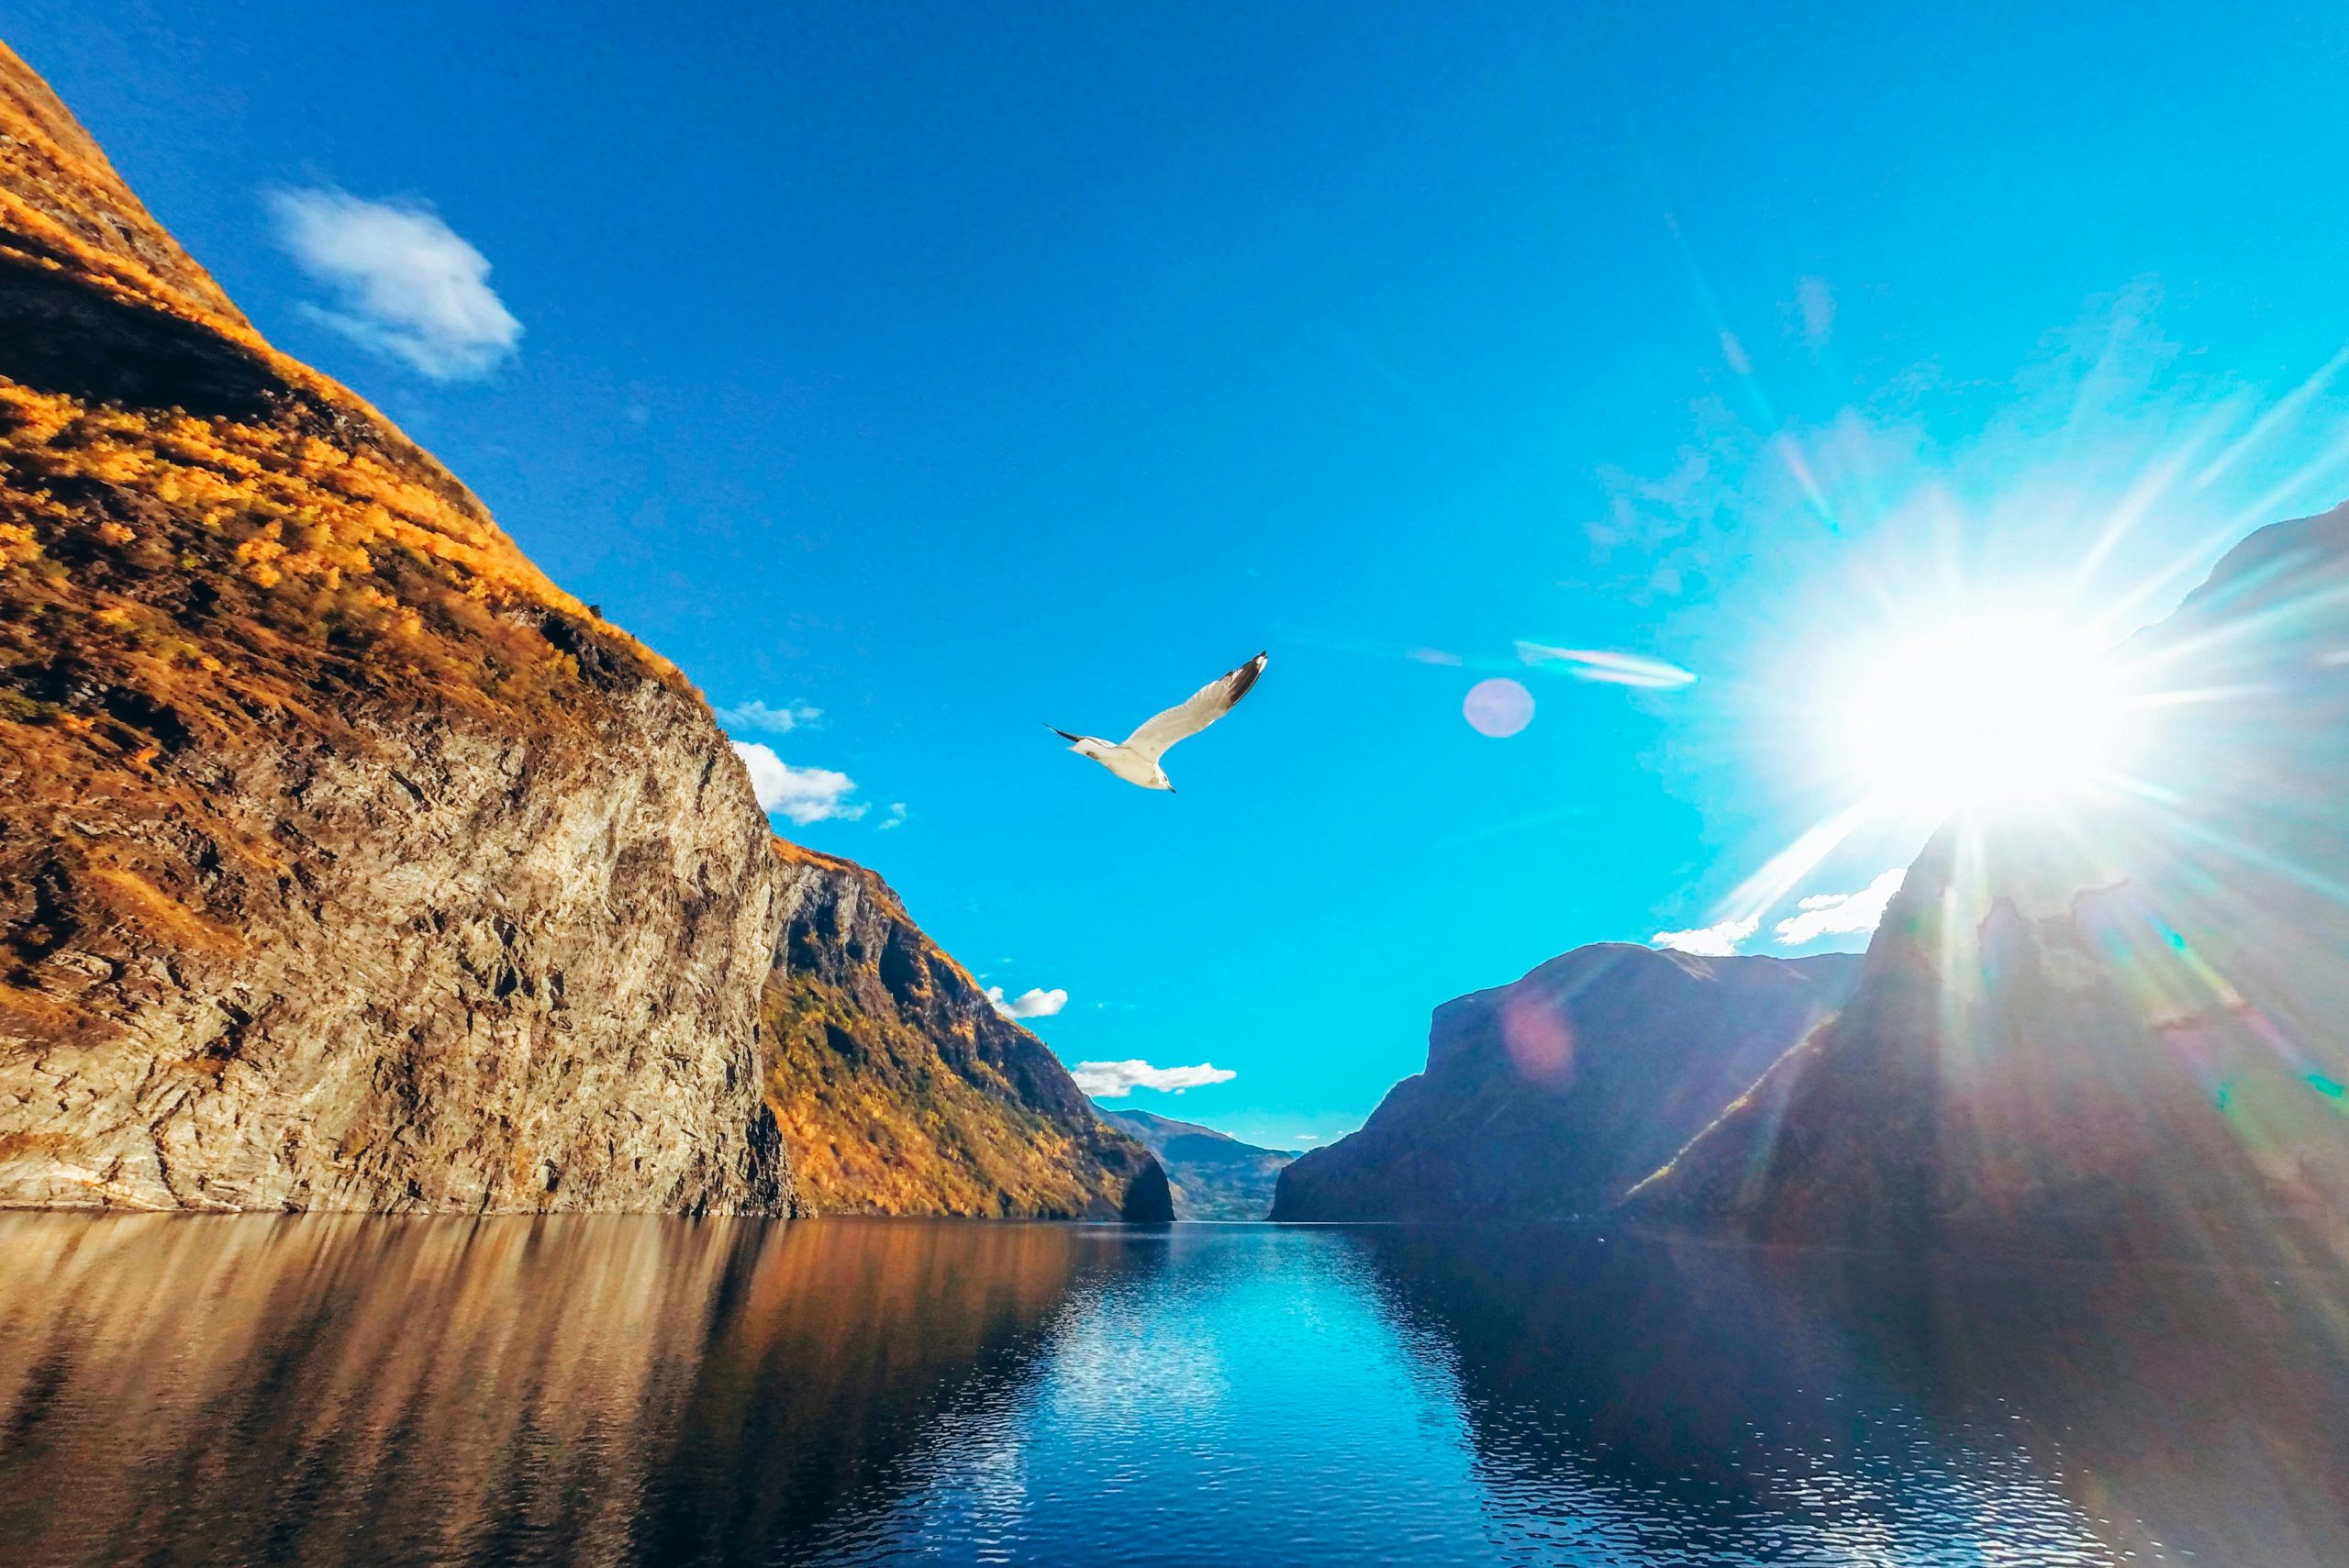 explore the stunning fjords of norway, with their dramatic landscapes, towering cliffs, and crystal-clear waters, on a breathtaking journey through nature's masterpiece.